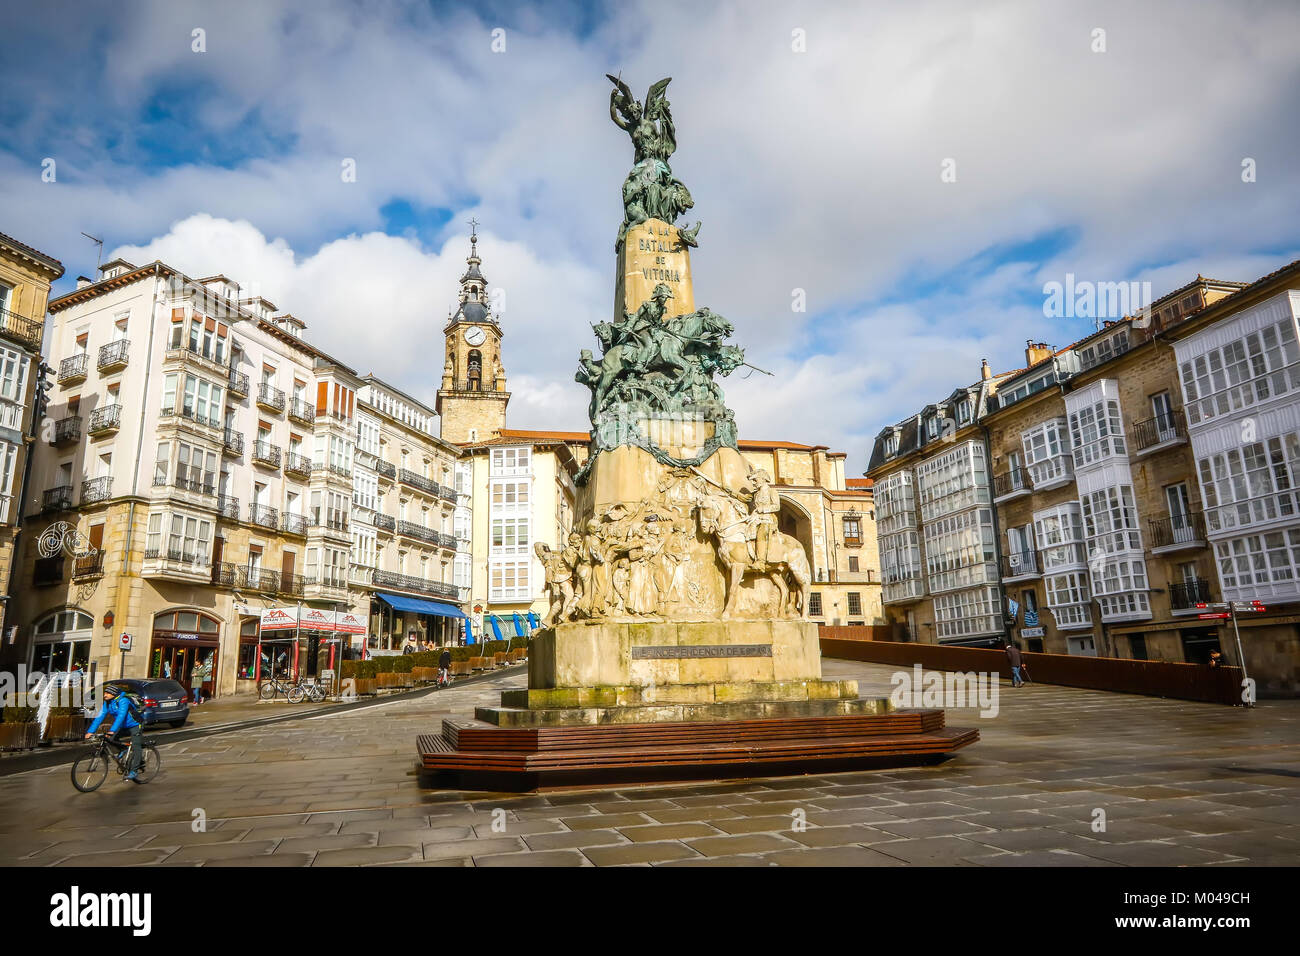 Vitoria, Spain - January 12, 2018: Virgen Blanca square in Vitoria. Vitoria-Gasteiz is the capital of the Autonomous Community of the Basque Country a Stock Photo